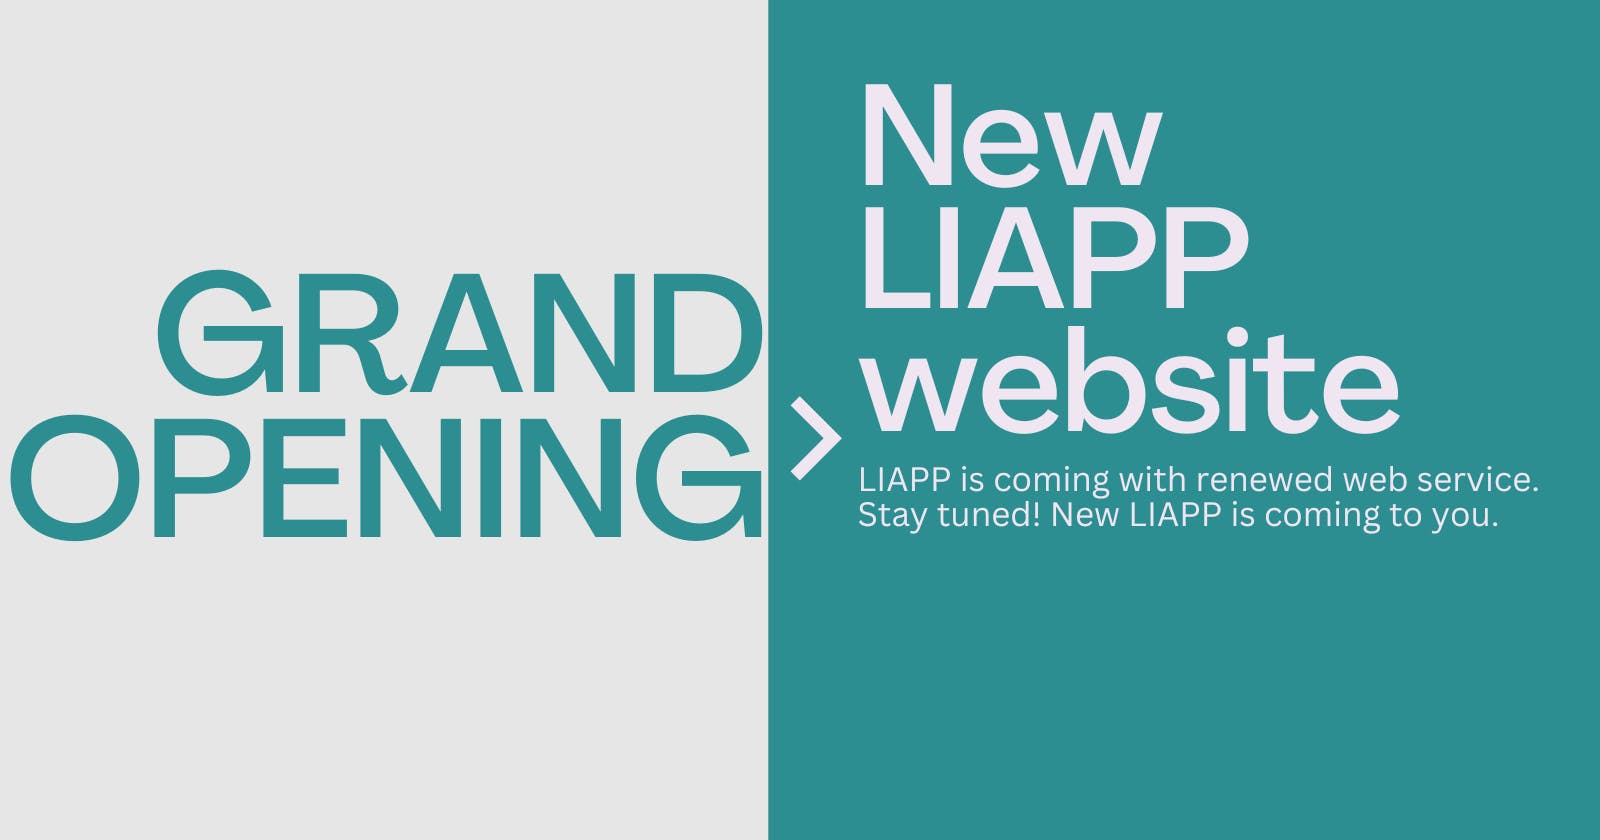 New LIAPP website is coming!